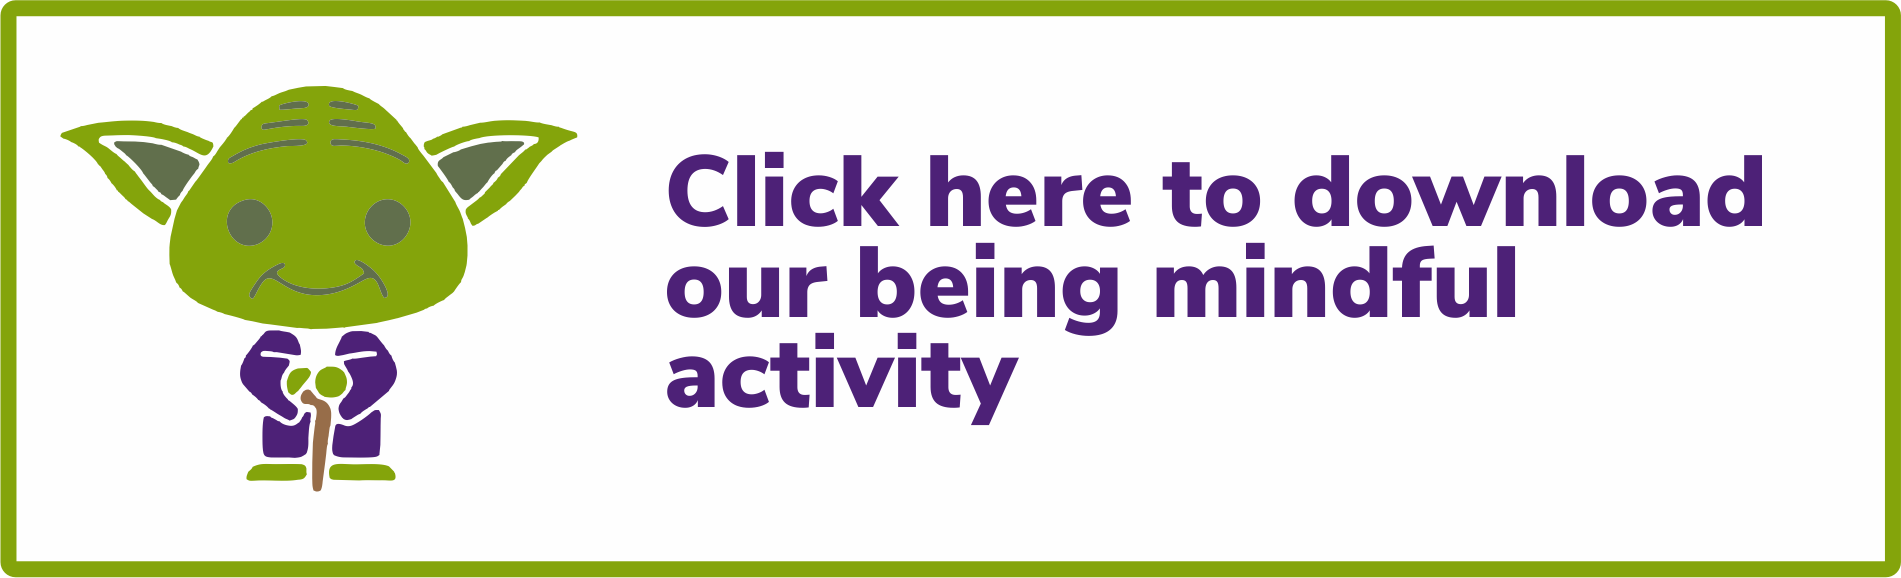 Click here to download our mindfulness activity